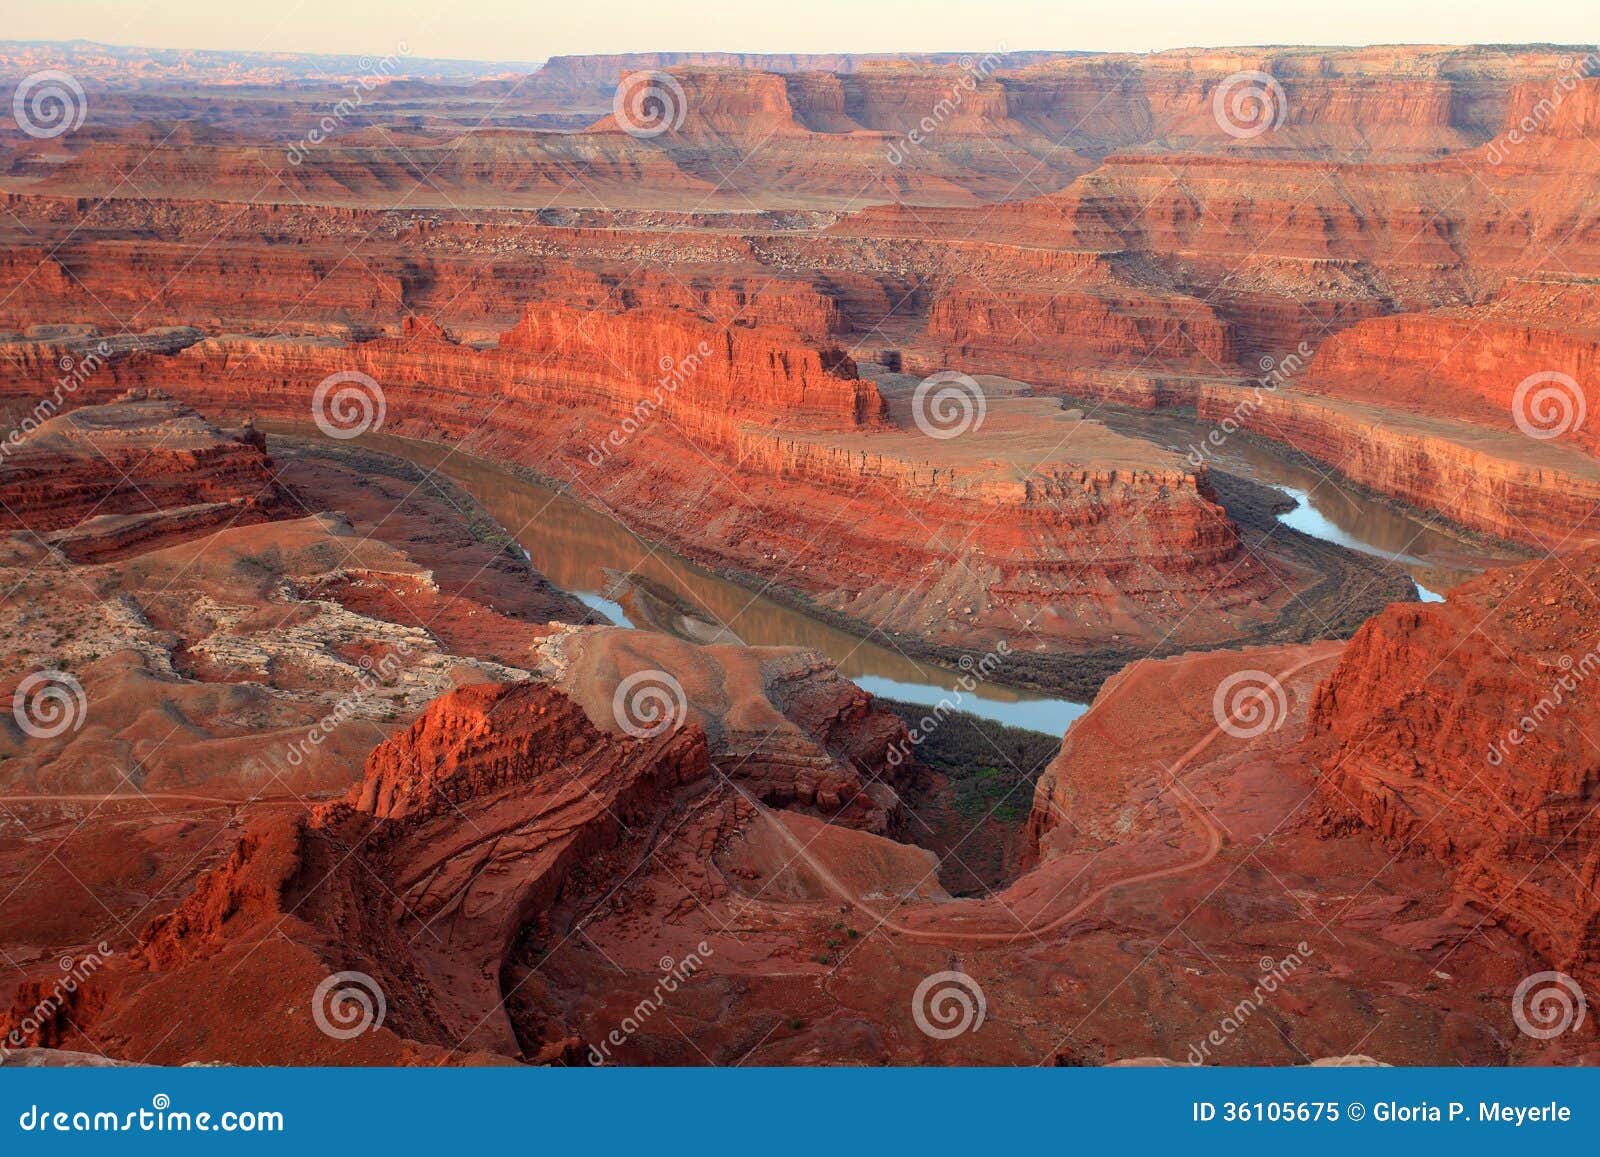 dead horse point - iconic american red rock landscape